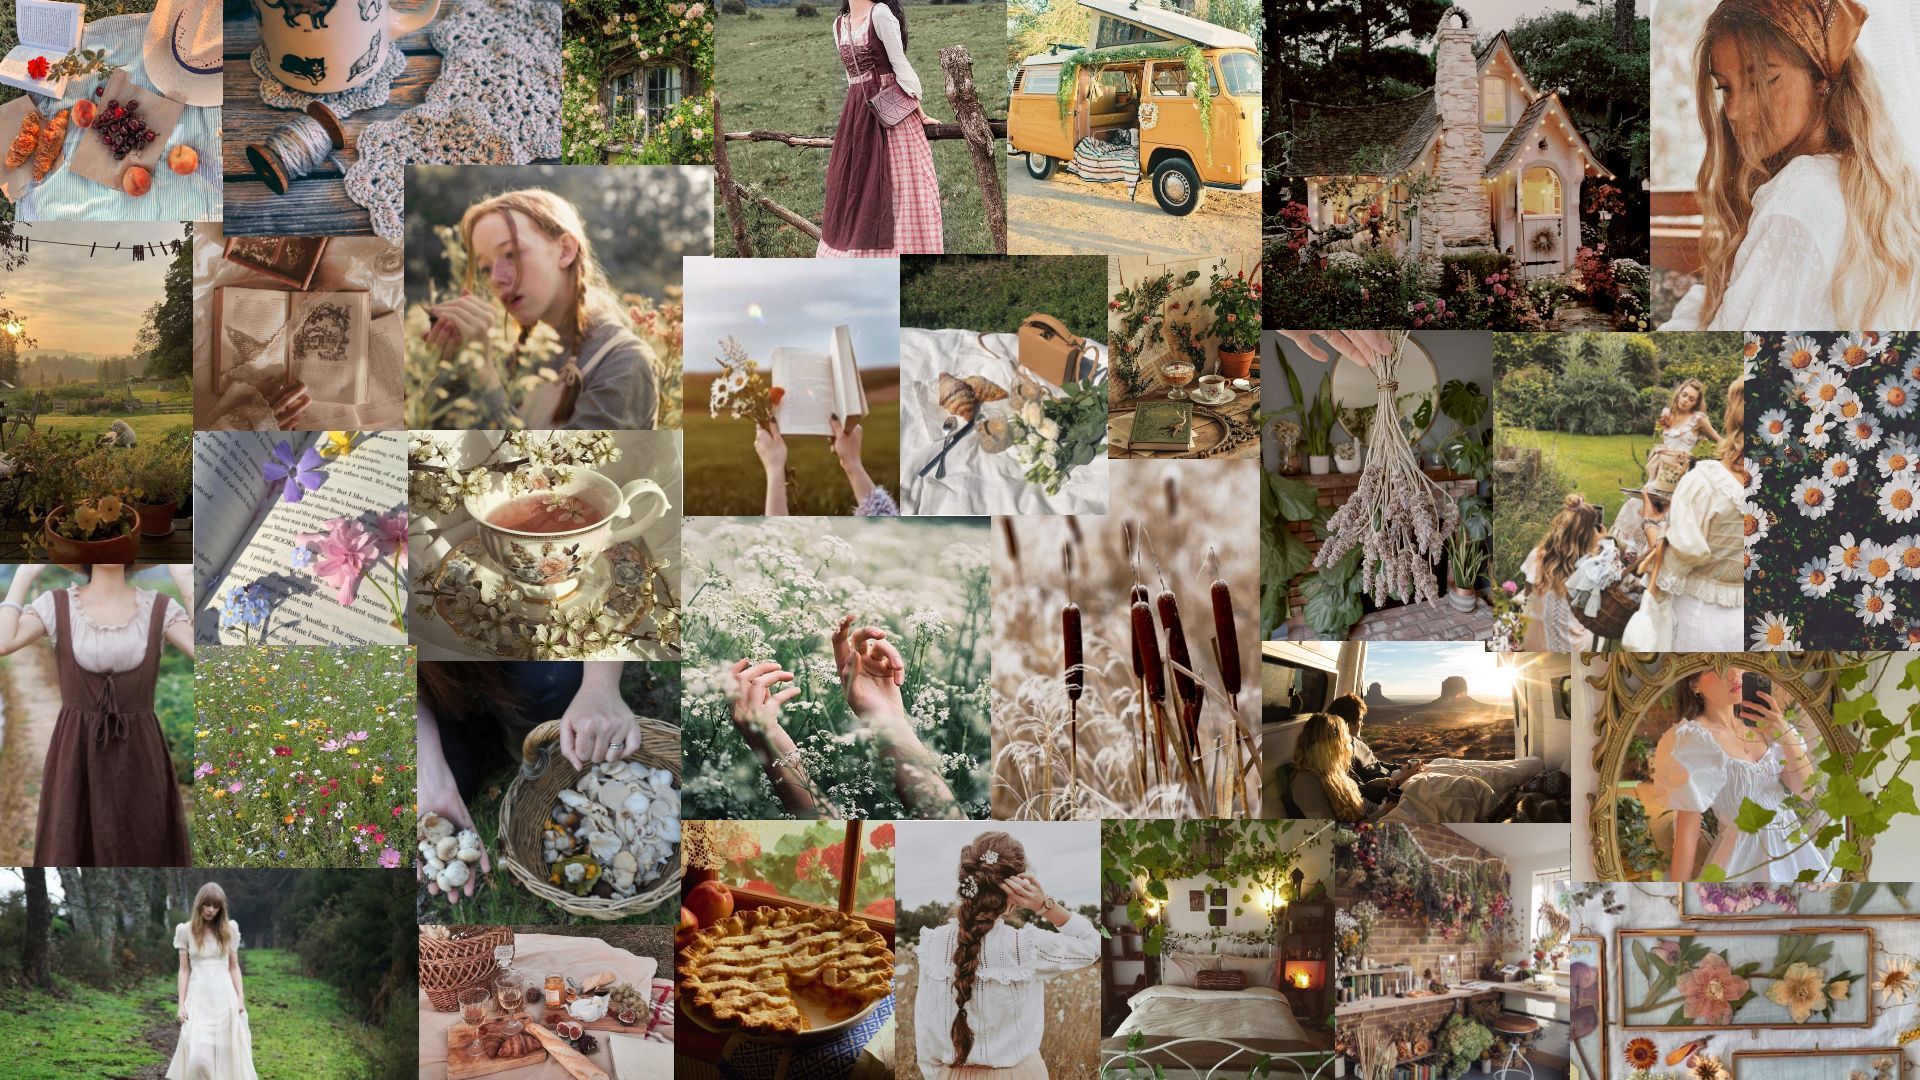 A collage of photos of nature, women, and flowers. - Cottagecore